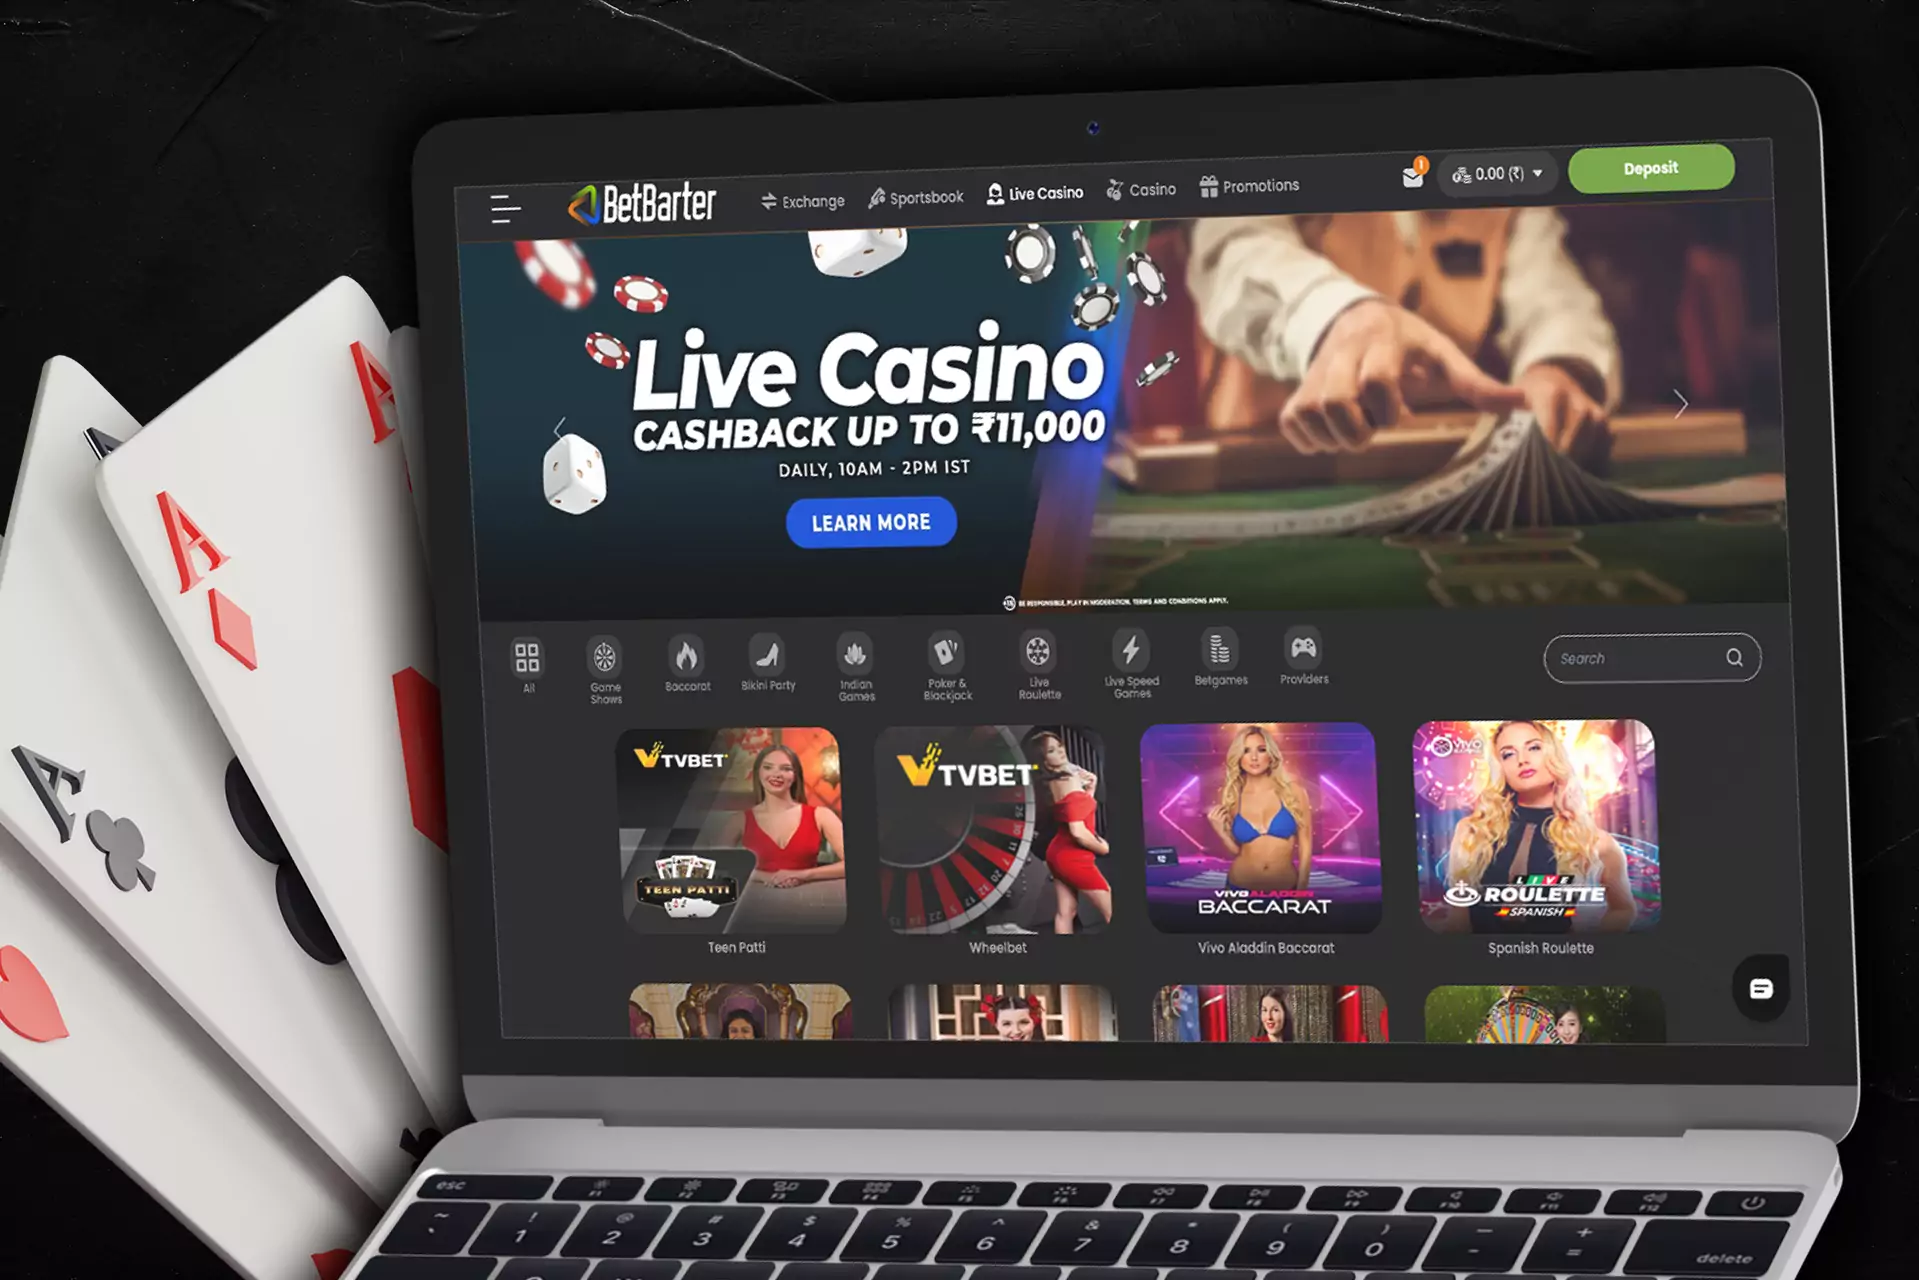 In the Betbarter live casino, you can play games with real dealers.